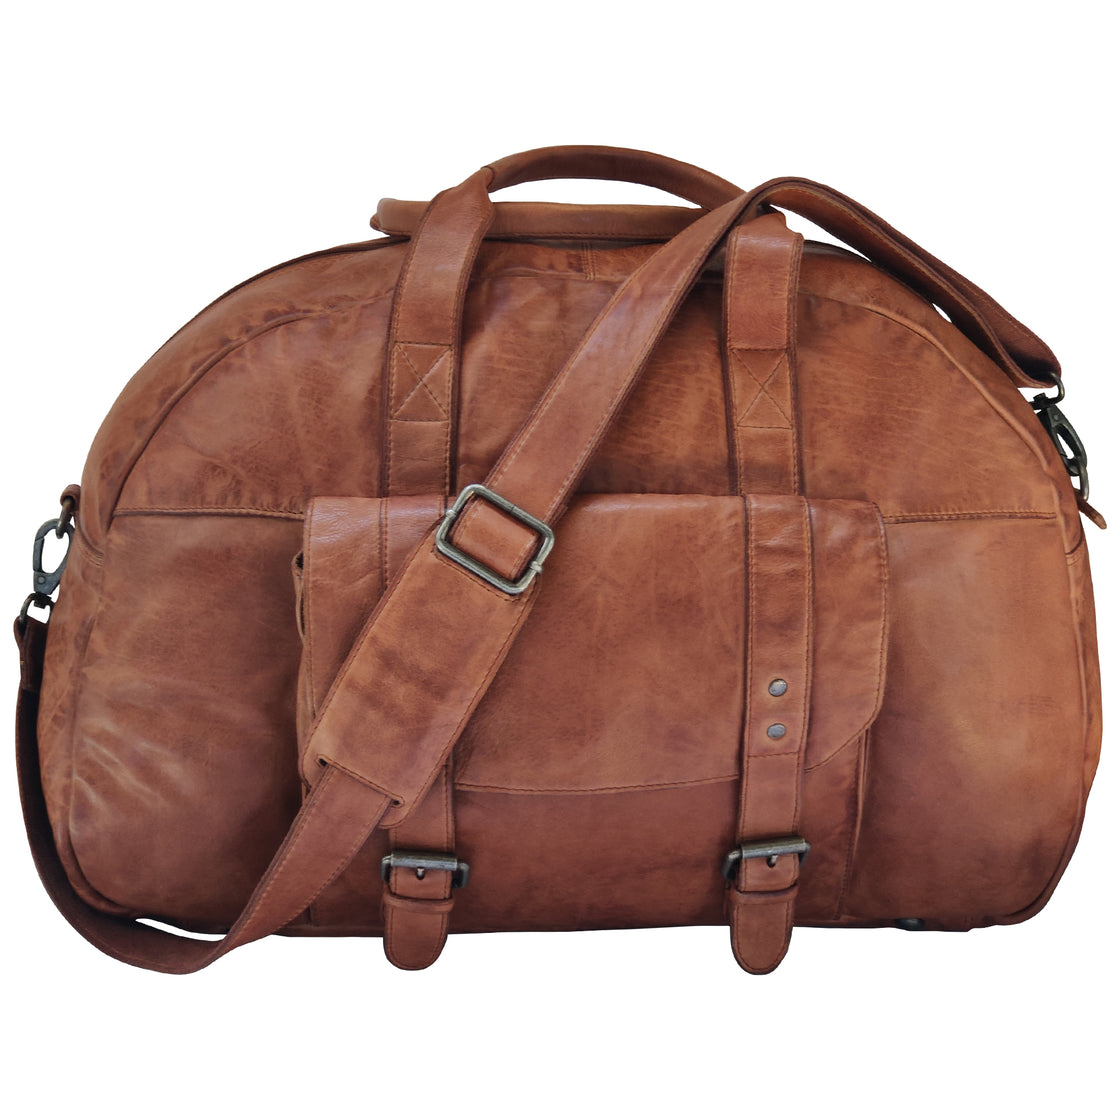 Leather Duffel Bags for Men - Holdall Airplane Underseat Carry on Luggage by Rustic Town